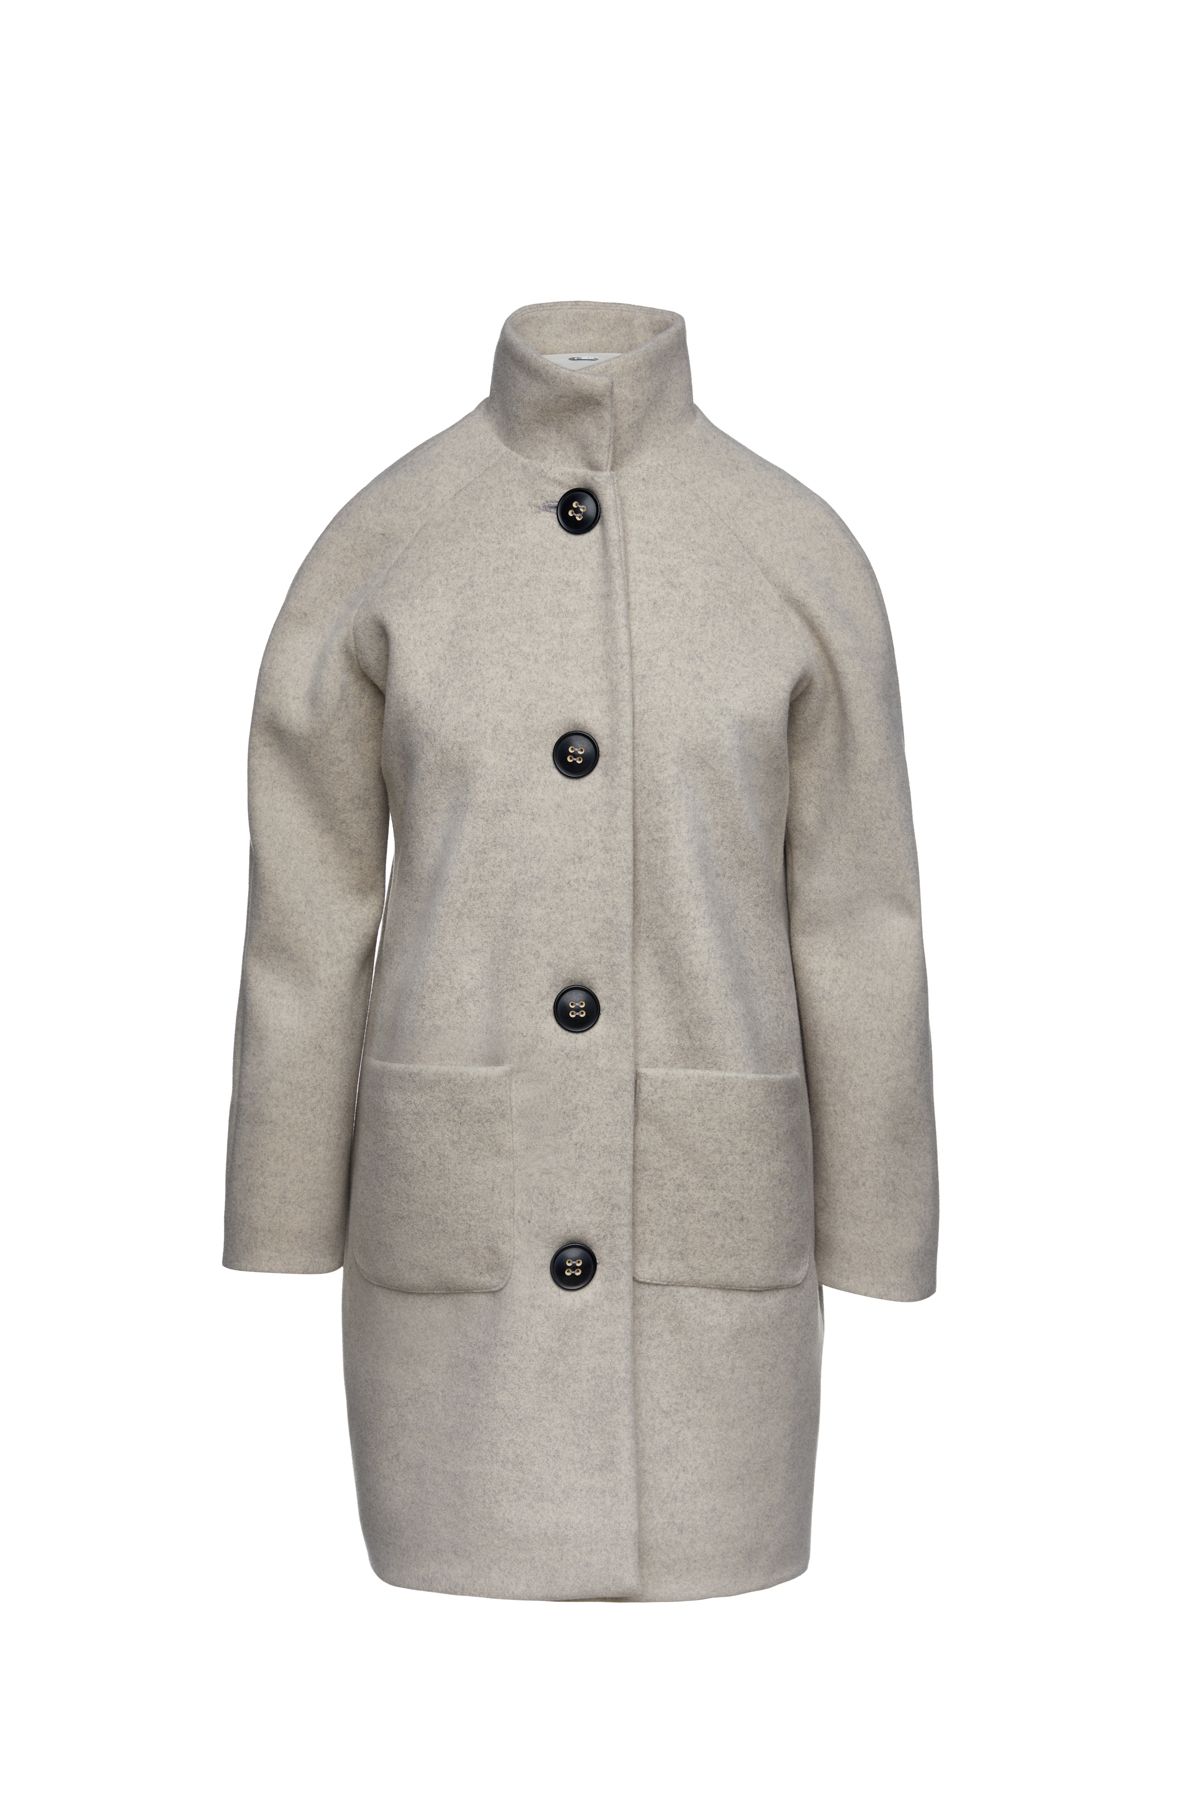 This sand colour mélange coat is crafted in mouflon fabric. It has raglan sleeves and an upright collar. There are two patch pockets in the front. The coat fastens in the front with 4 black buttons in natural material with ecru holes. It has a loose fit silhouette.  Our model is 176cm and is wearing size 36/S. Measurements for size 38/M (in cm): Shoulder -48, Chest-52, Waist-54, Bottom-56, Sleeve Length-52, Body length-92.